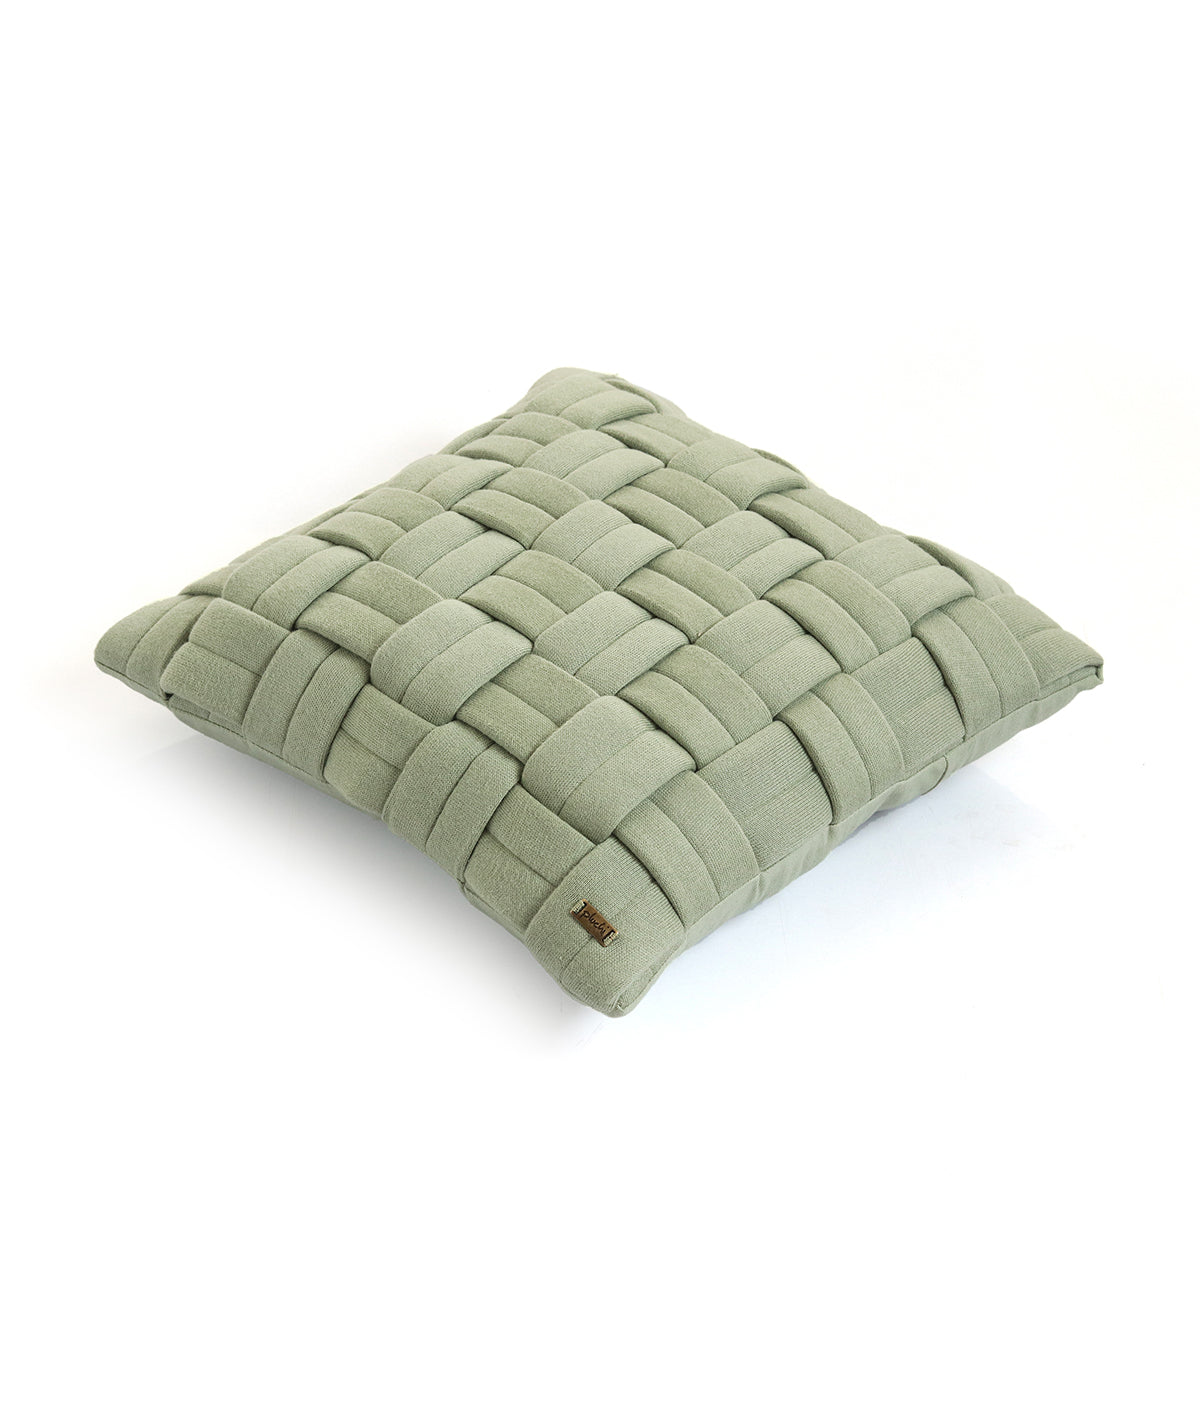 Basket Knit Cotton Knitted Decorative Pistachio Green color 16 x 16 Inches Cushion Cover